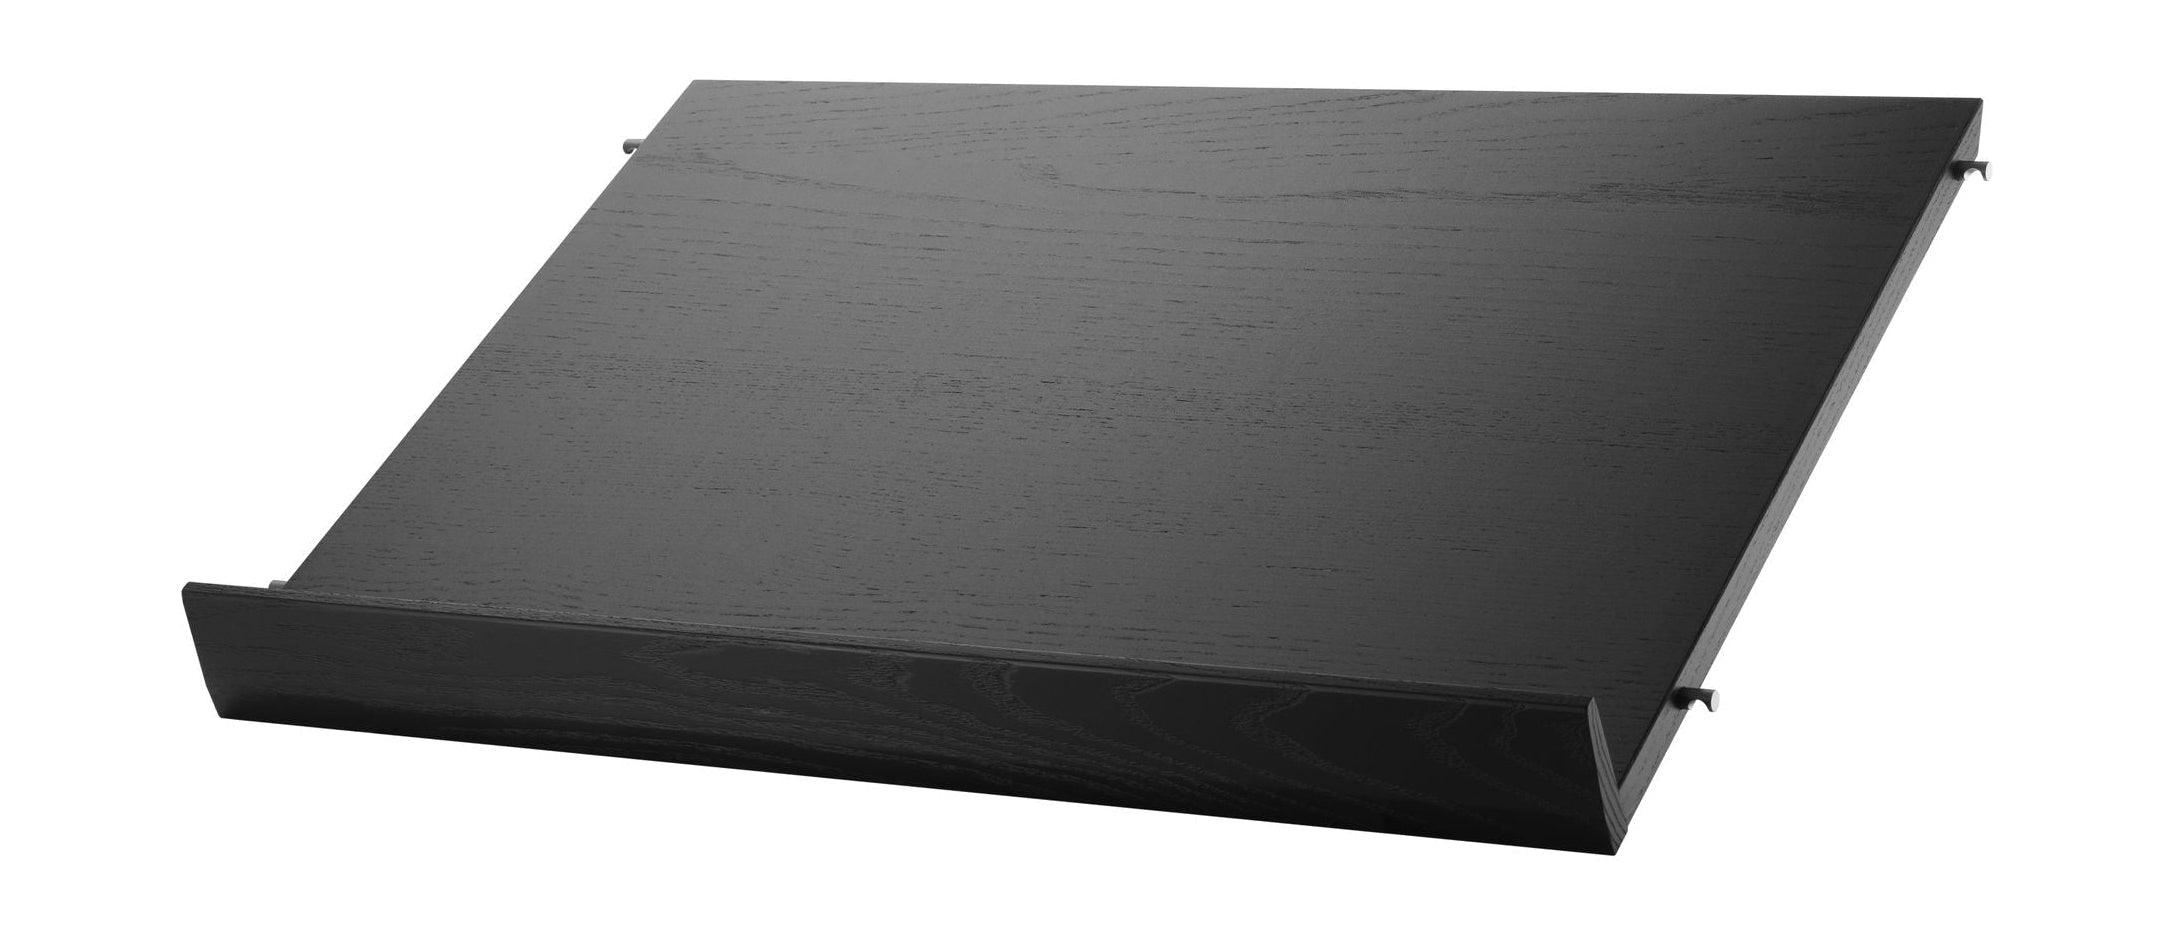 String Furniture String System Magazine Tray Wood Black Stained Ash, 30x58 Cm